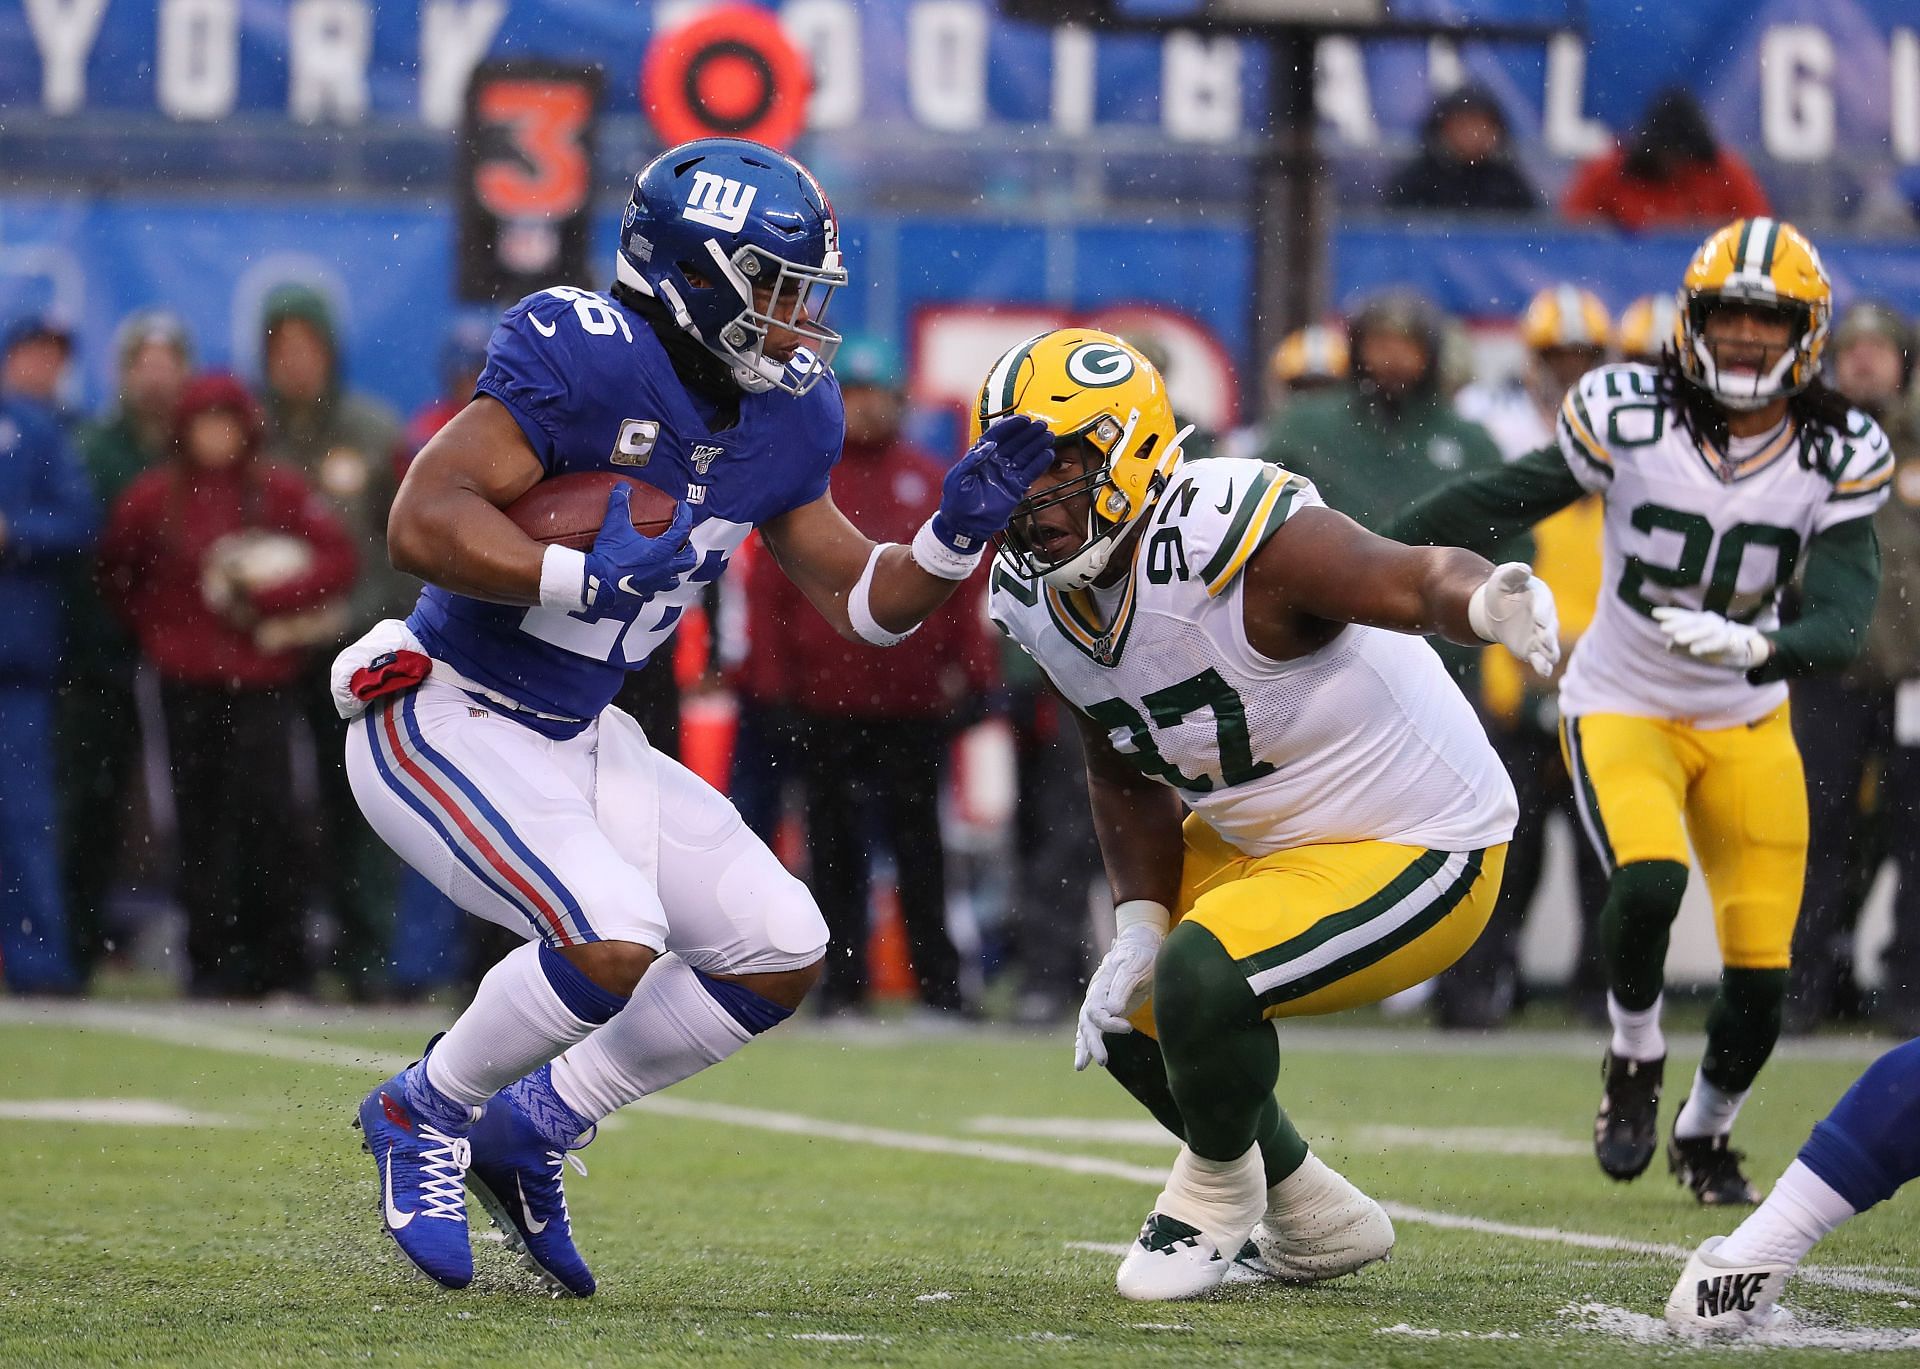 Best Parlay (+340) for New York Giants vs. Green Bay Packers October